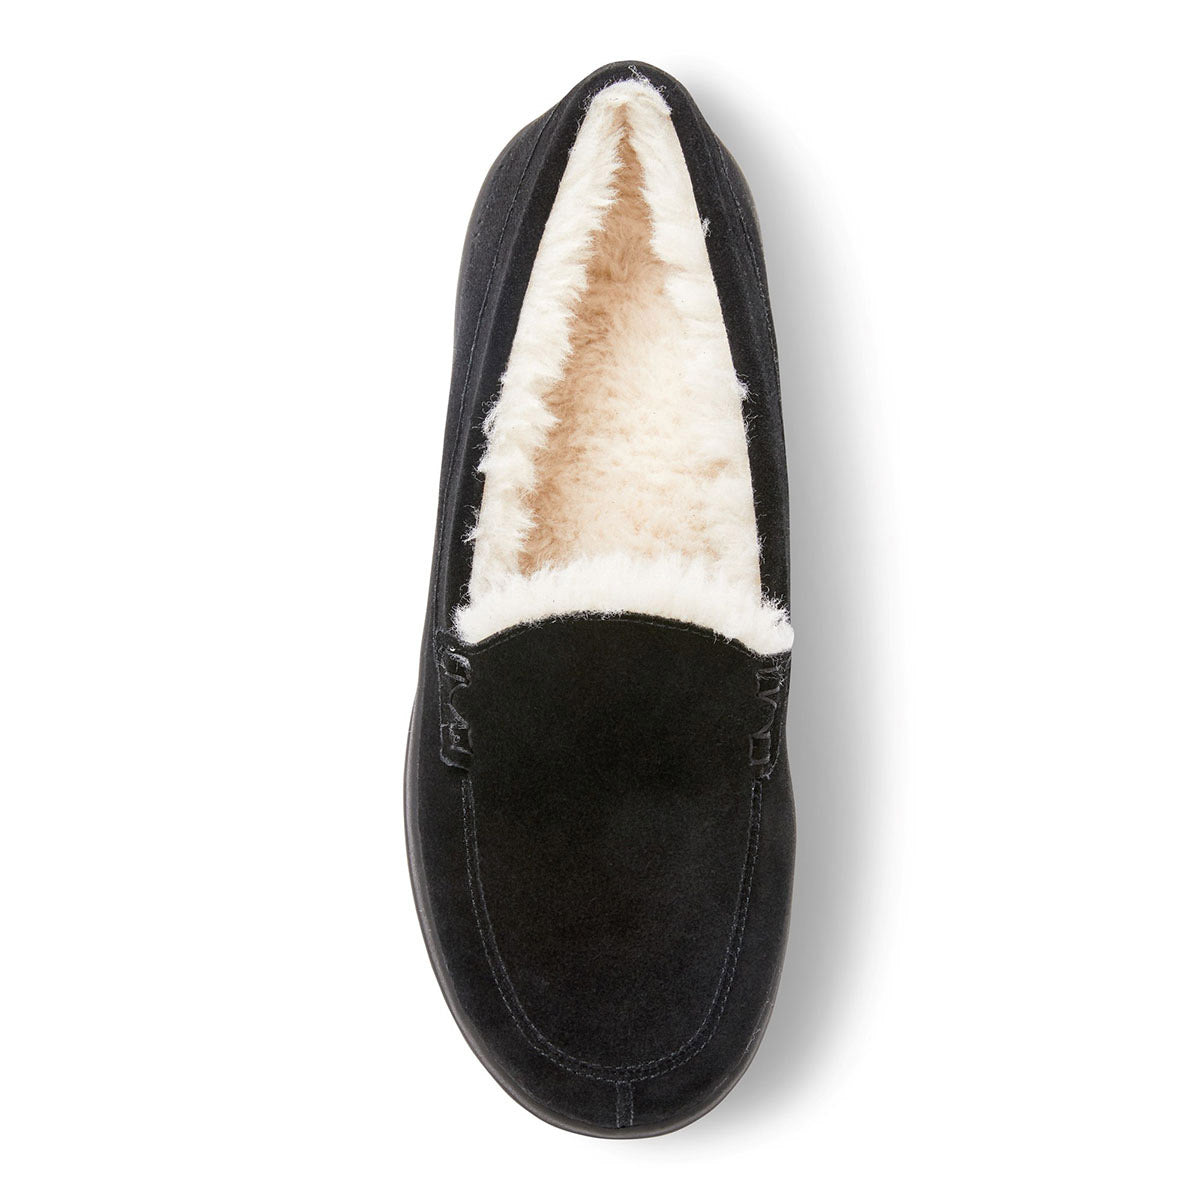 Sentence with replaced product: Vionic Lynez Suede Black women&#39;s slipper with white fleece lining on a white background.